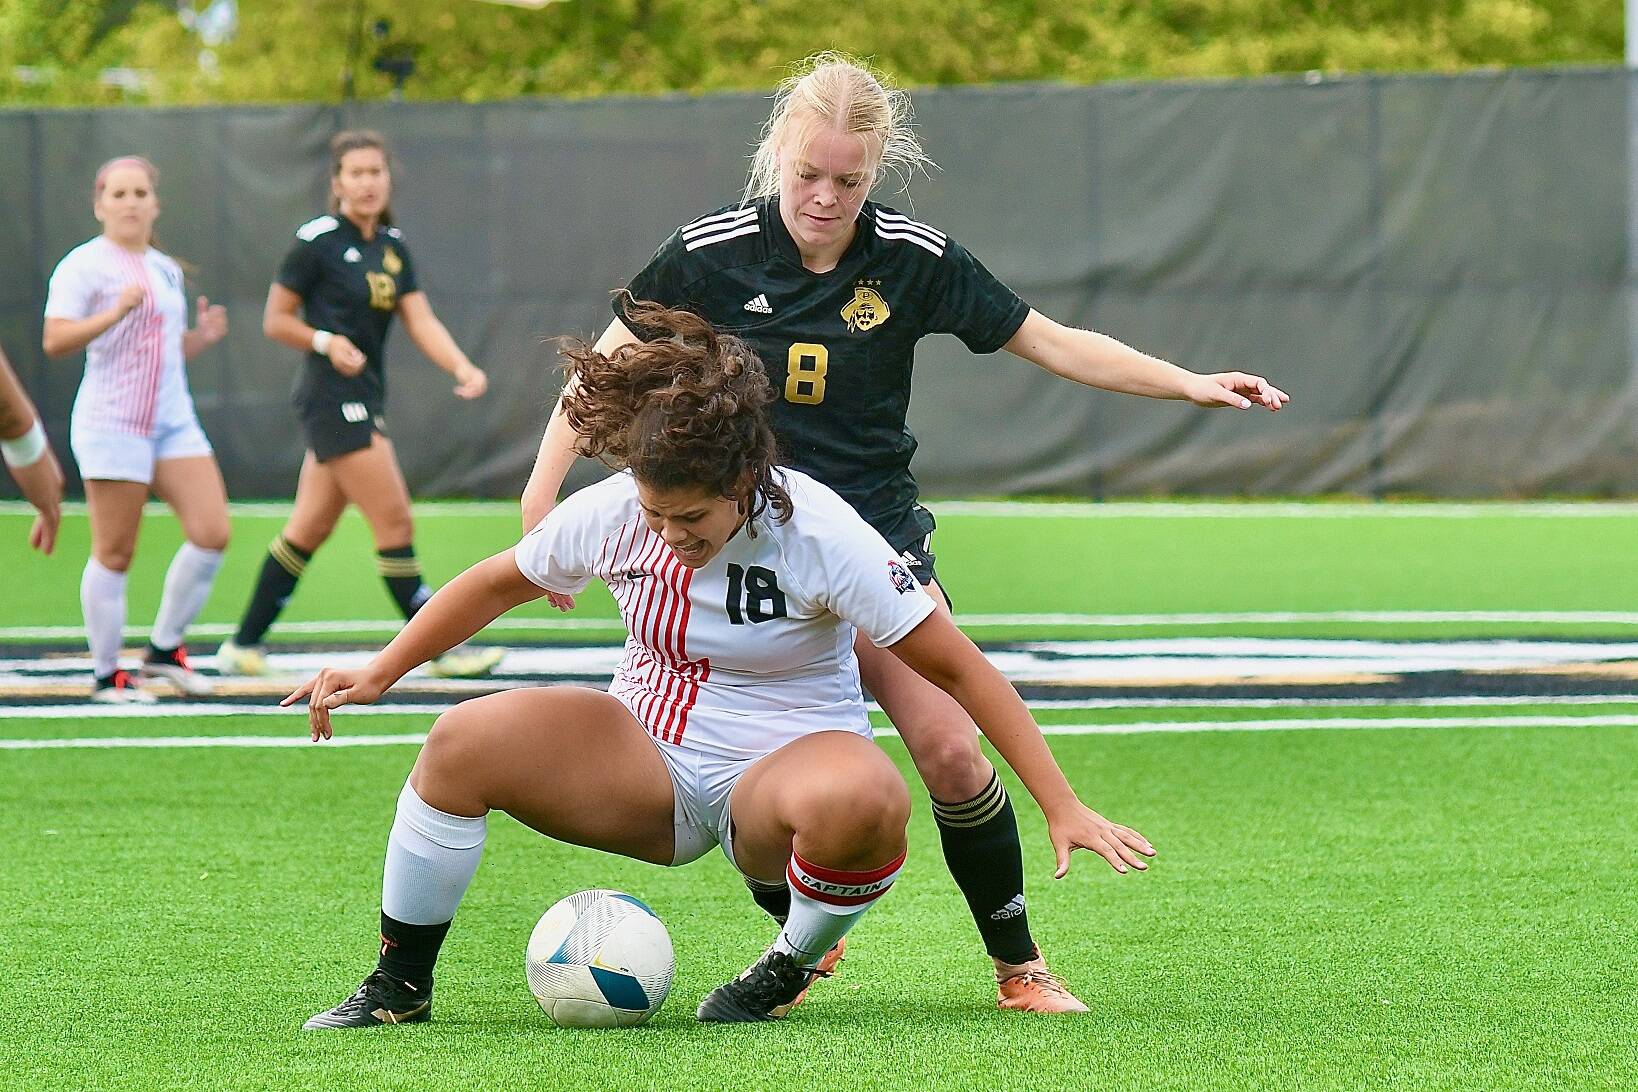 Peninsula College’s Anna Petty (8) battles with Everett’s Miah Manibusan (18) over possession of the ball in Wednesday’s match at Wally Sigmar Field. Petty had two goals and an assist in an 11-0 Peninsula victory. (Jay Cline/Peninsula College)